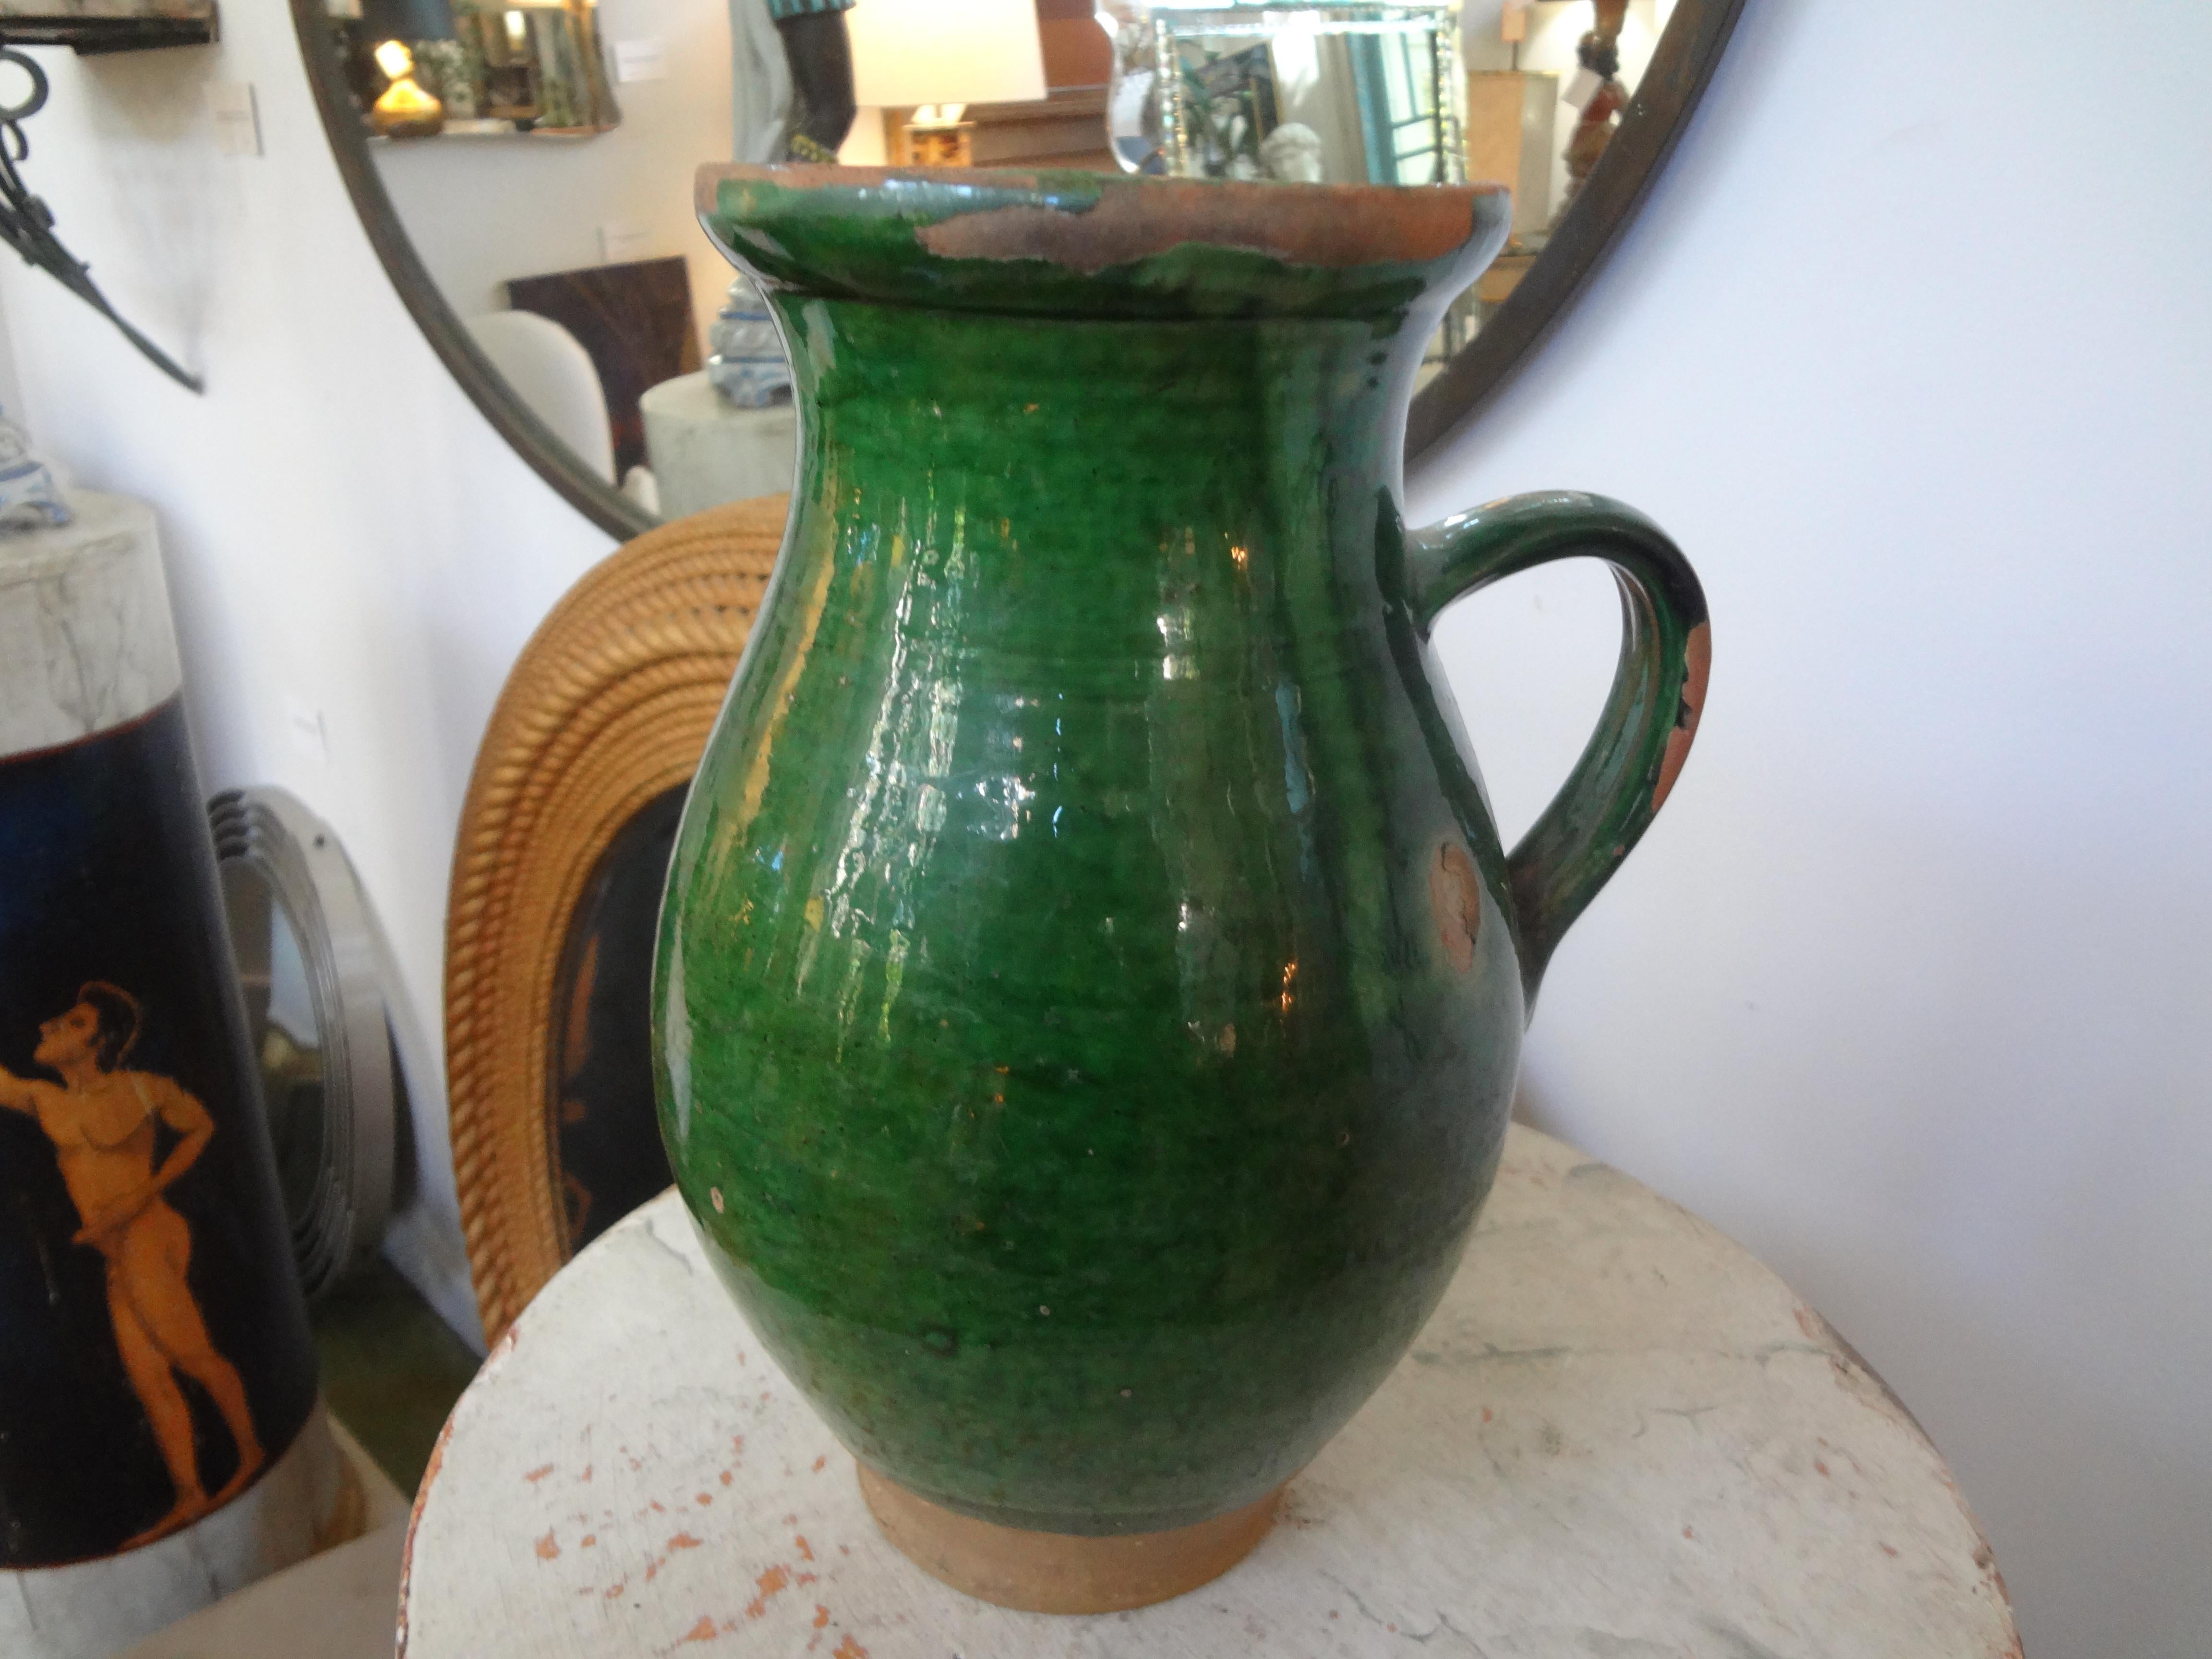 A 19th century French green glazed terracotta pottery vessel. This vessel was used for milk or as a vinegar pot (vinaigrier). These vessels were most often from the Southwest part of France. Our pot is in good condition with some losses to glaze.